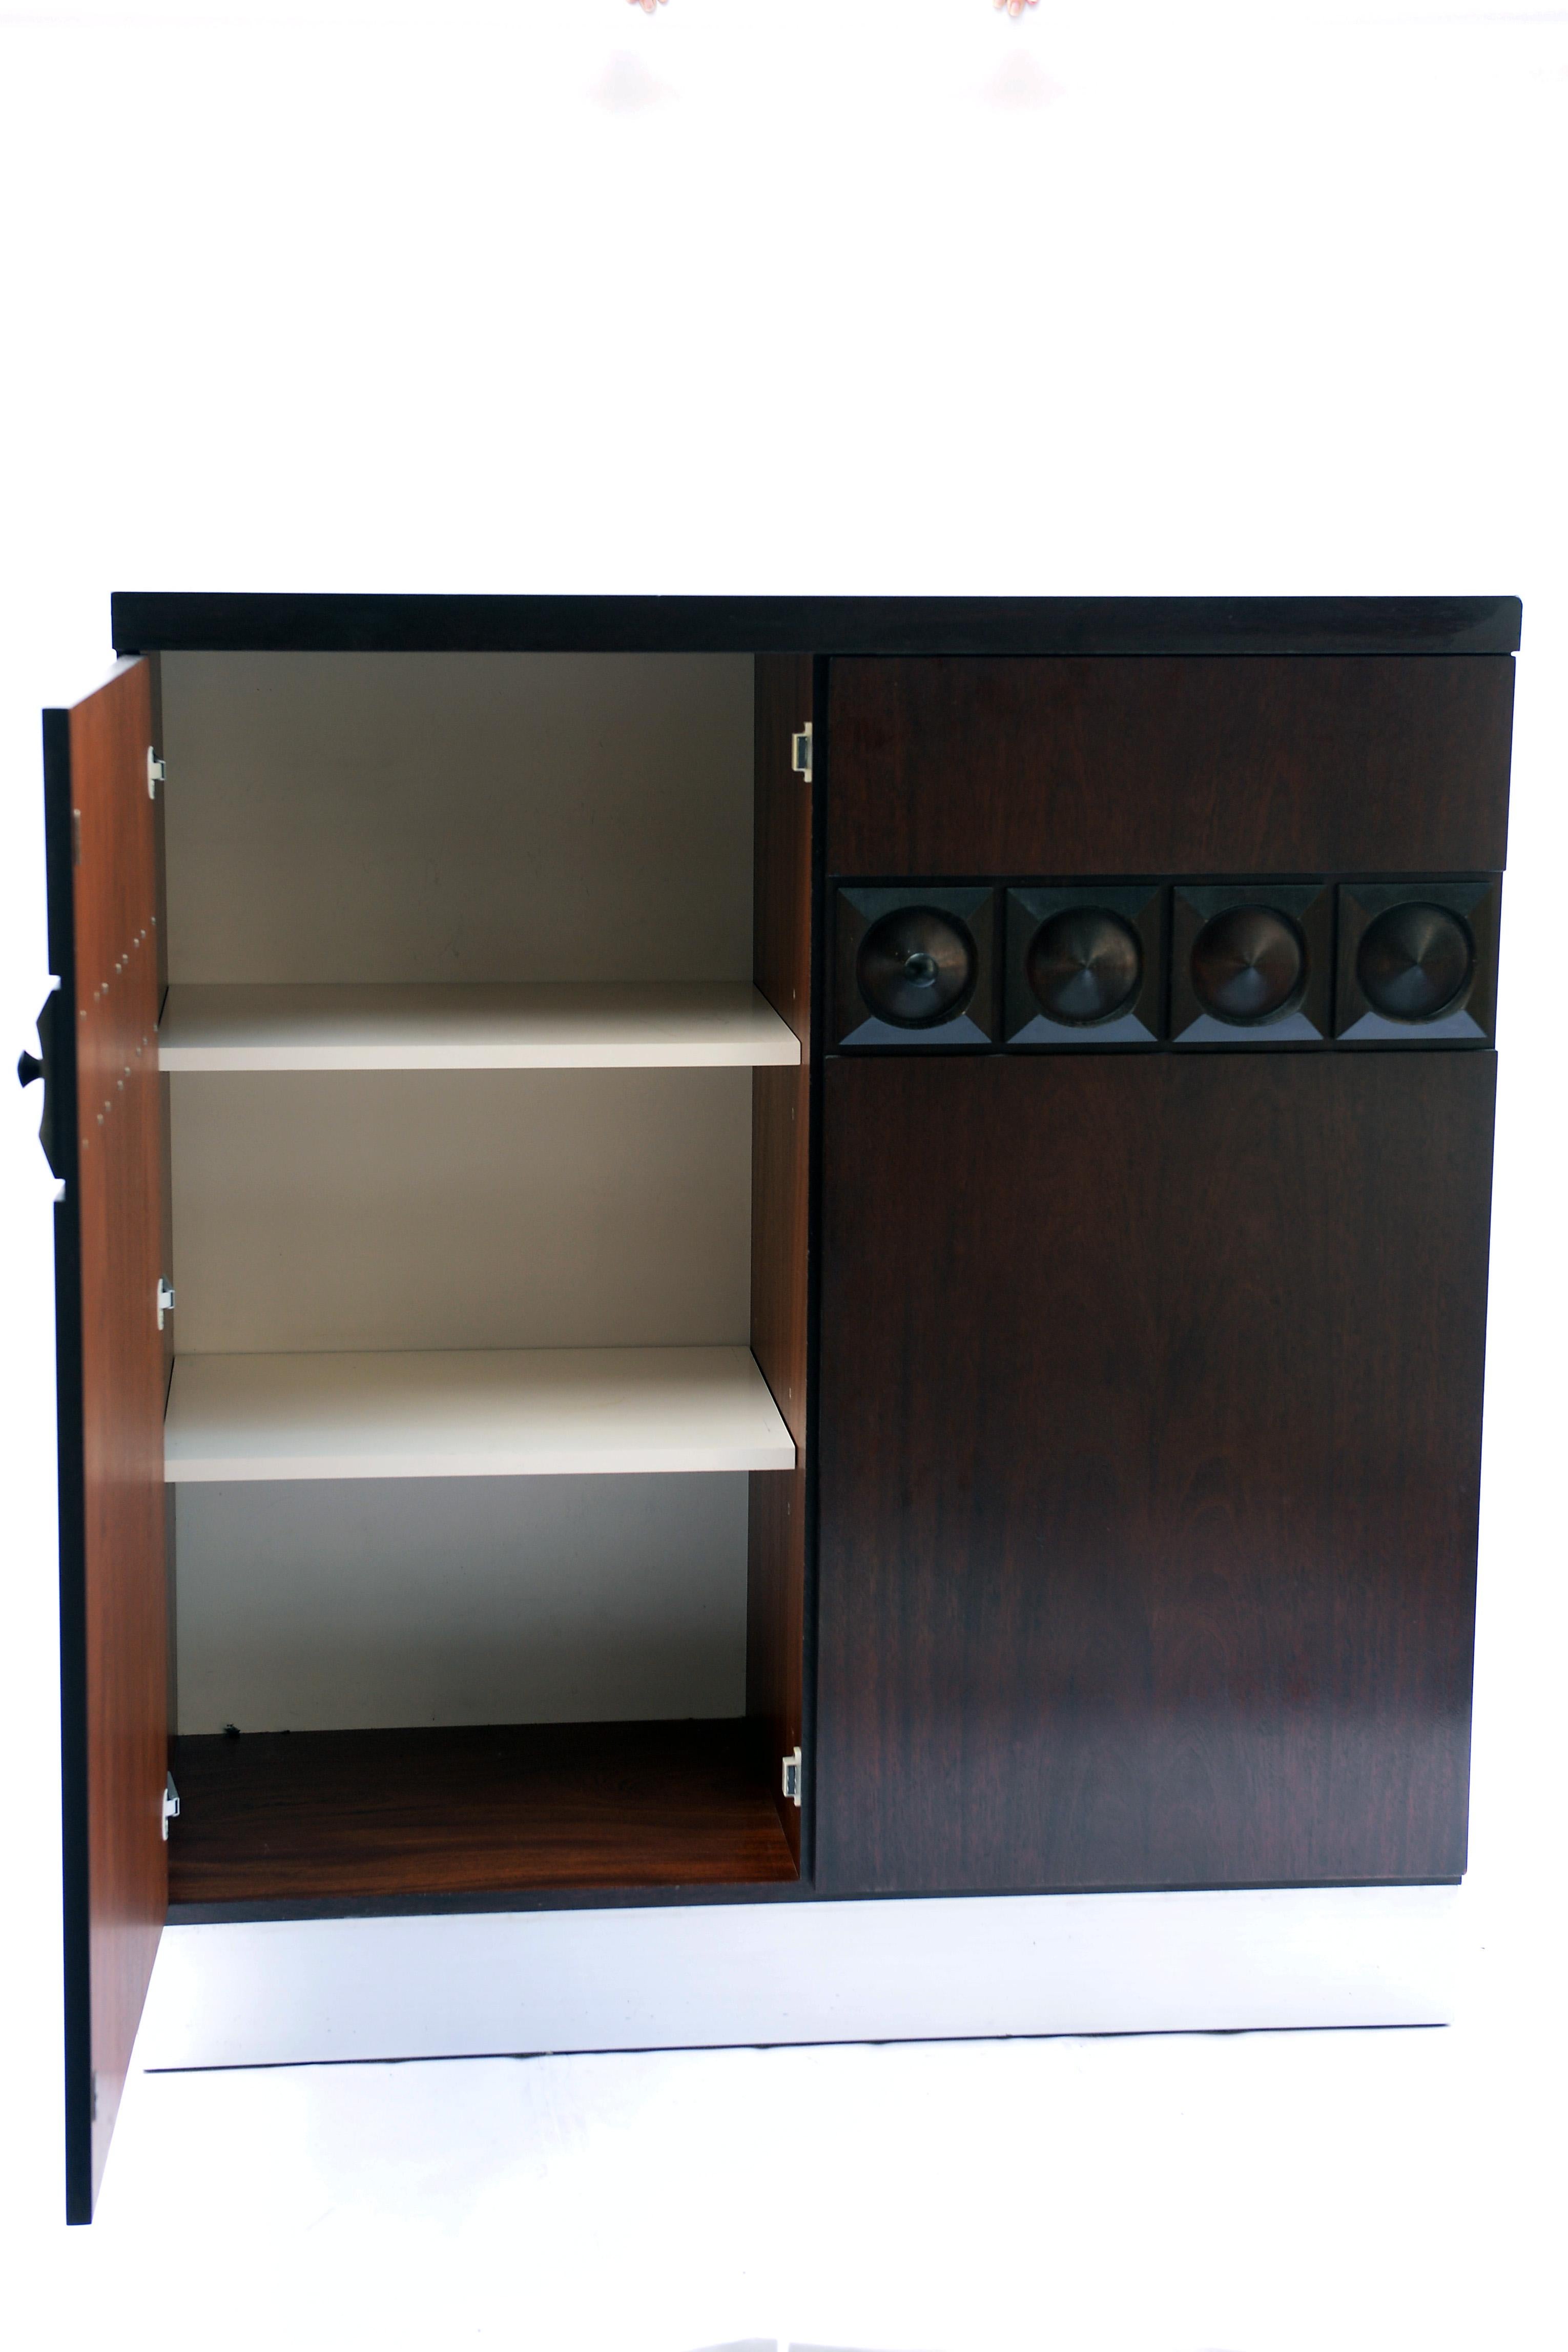 This two door cabinet is made from oak and unlike many other Brutalist cabinets this one has only a partly graphical design, making it more subtile.

It has two shelves on the left and the right door unveils a lit 3 shelves and a 3-bottle